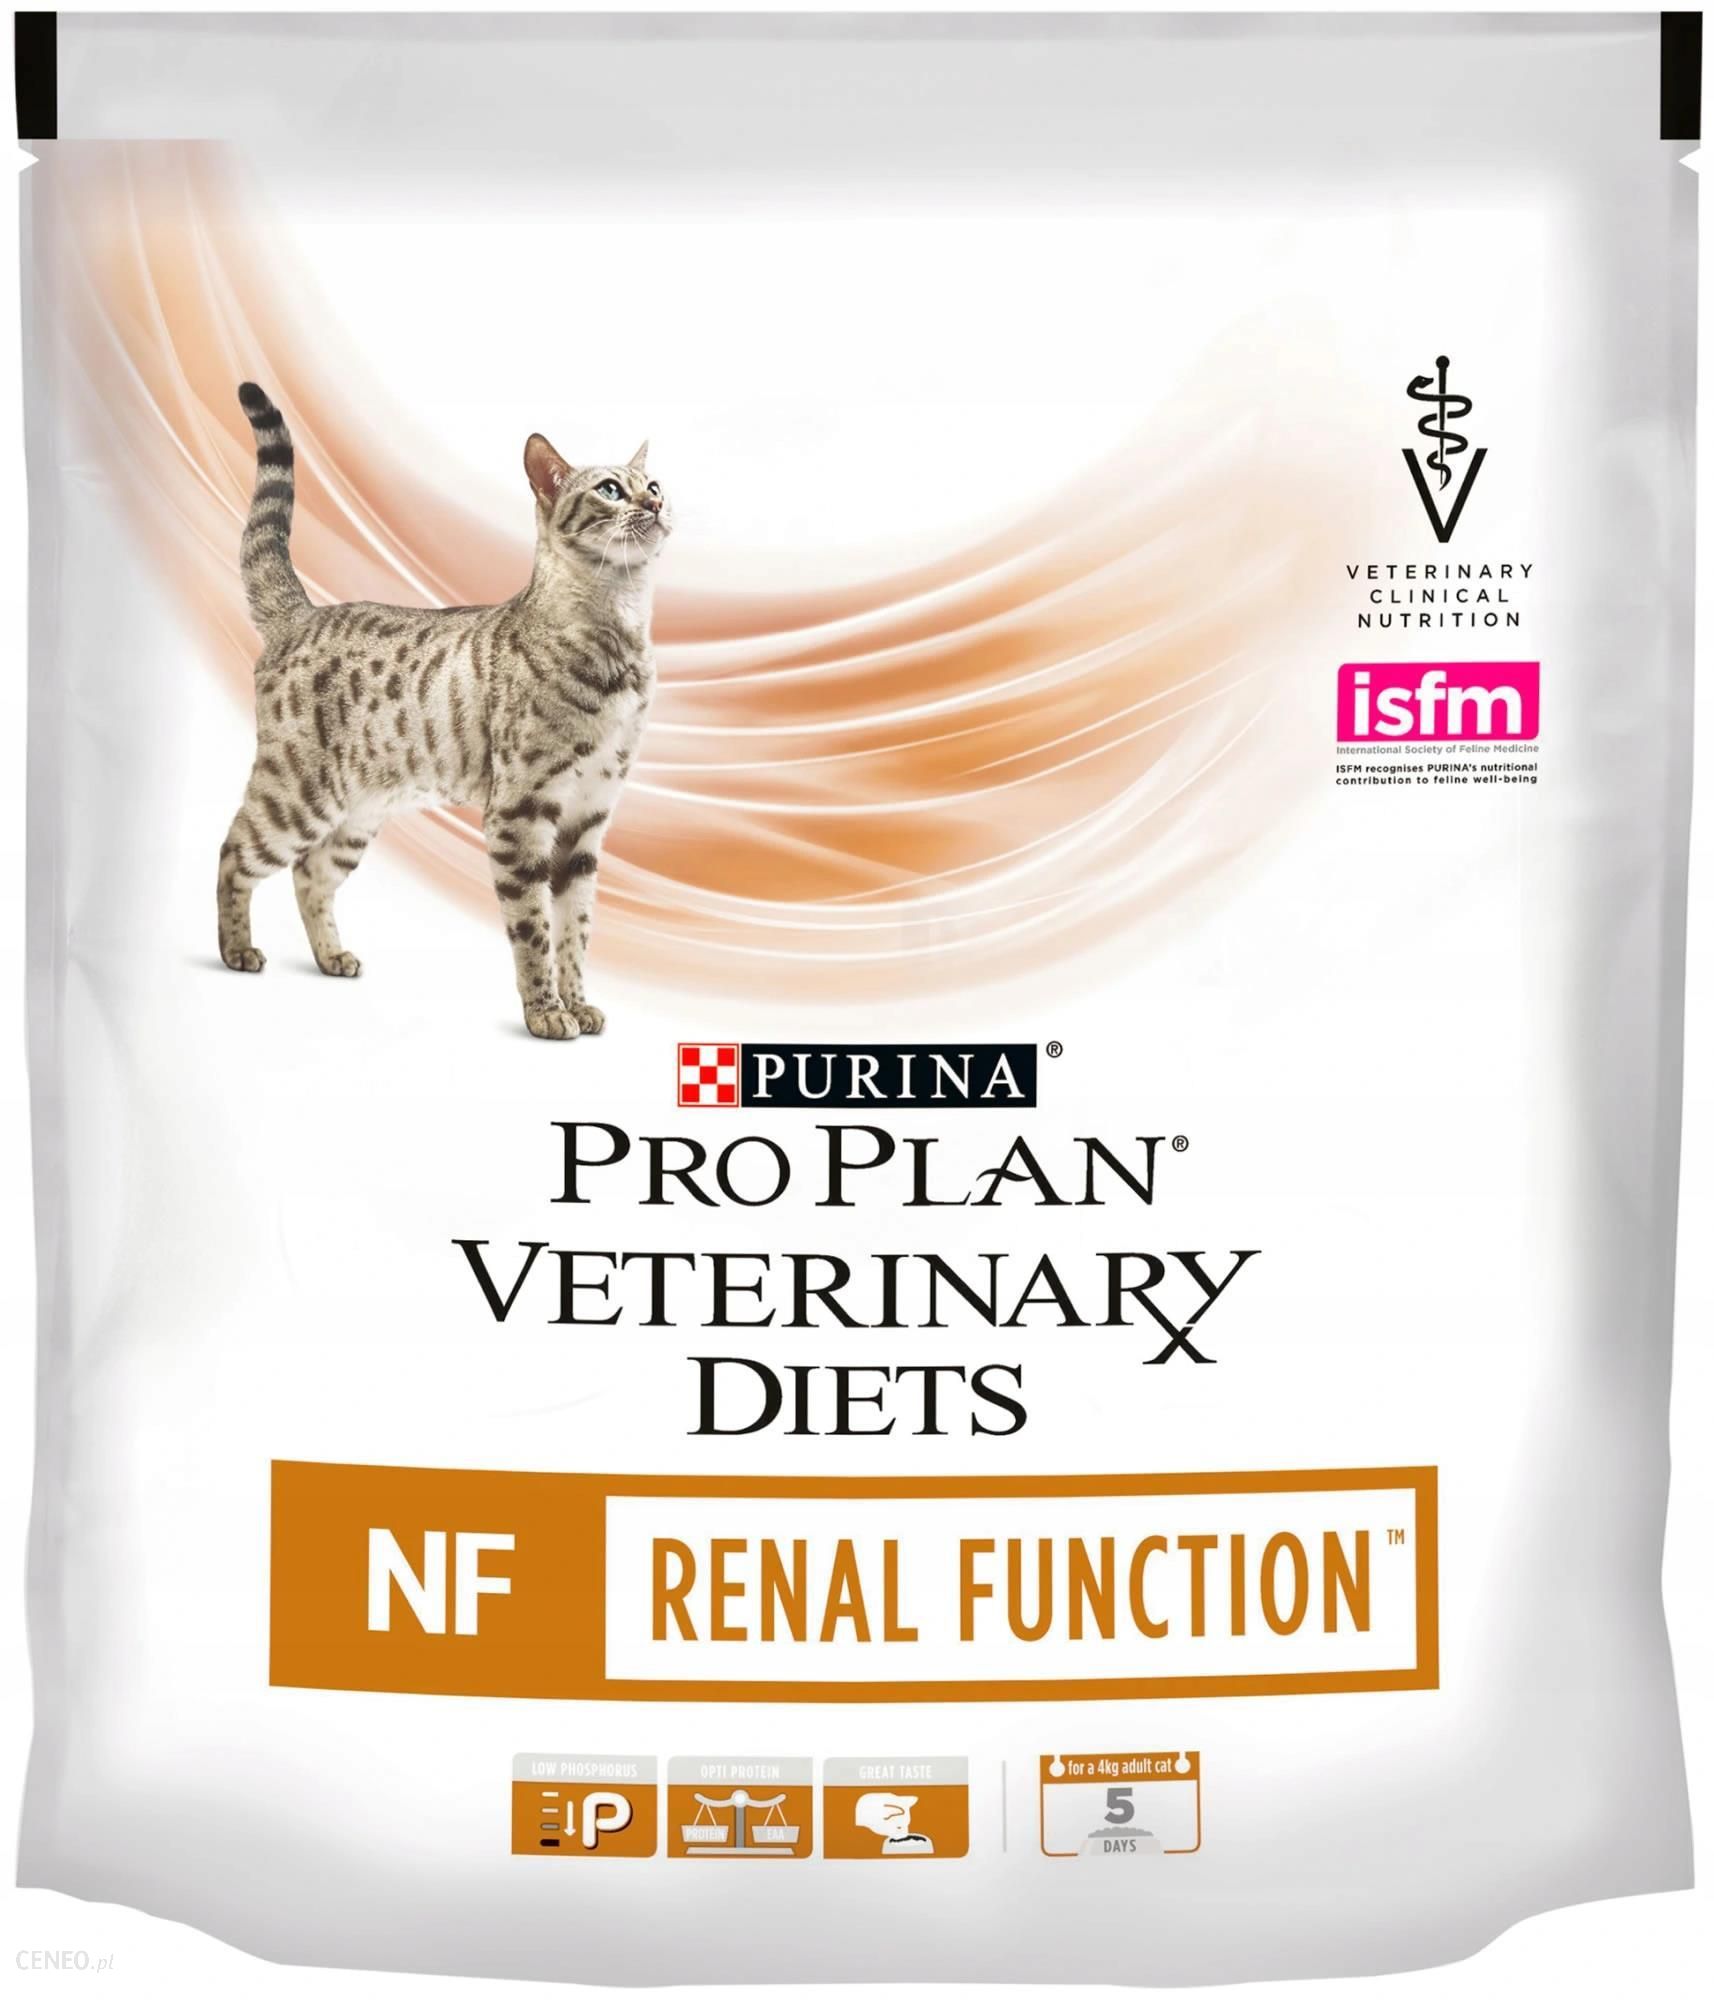 Pro Plan Veterinary Diets Renal Function NF 350g